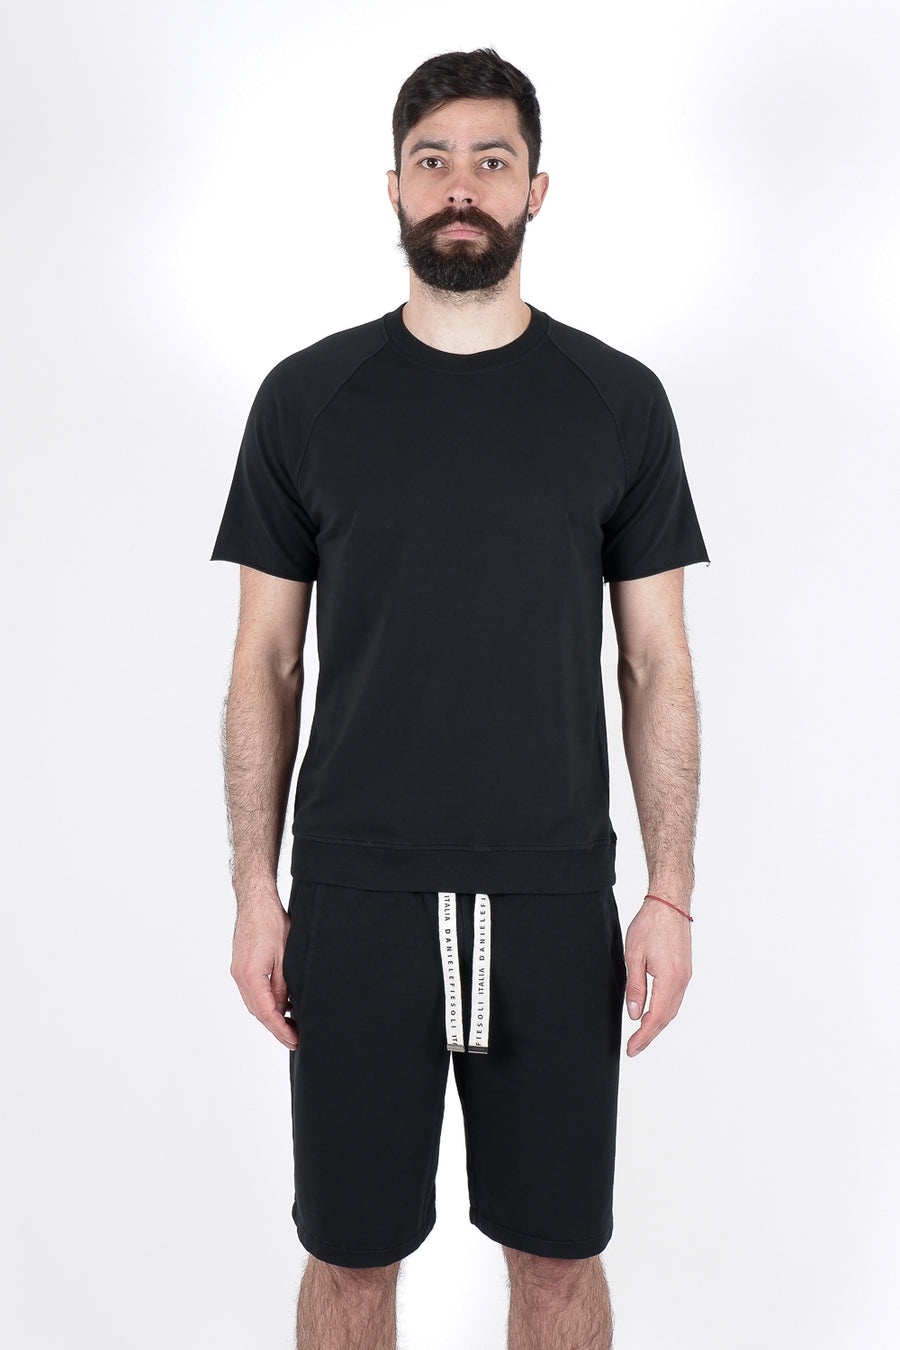 Buy the Daniele Fiesoli Cotton T-Shirt in Black at Intro. Spend £50 for free UK delivery. Official stockists. We ship worldwide.